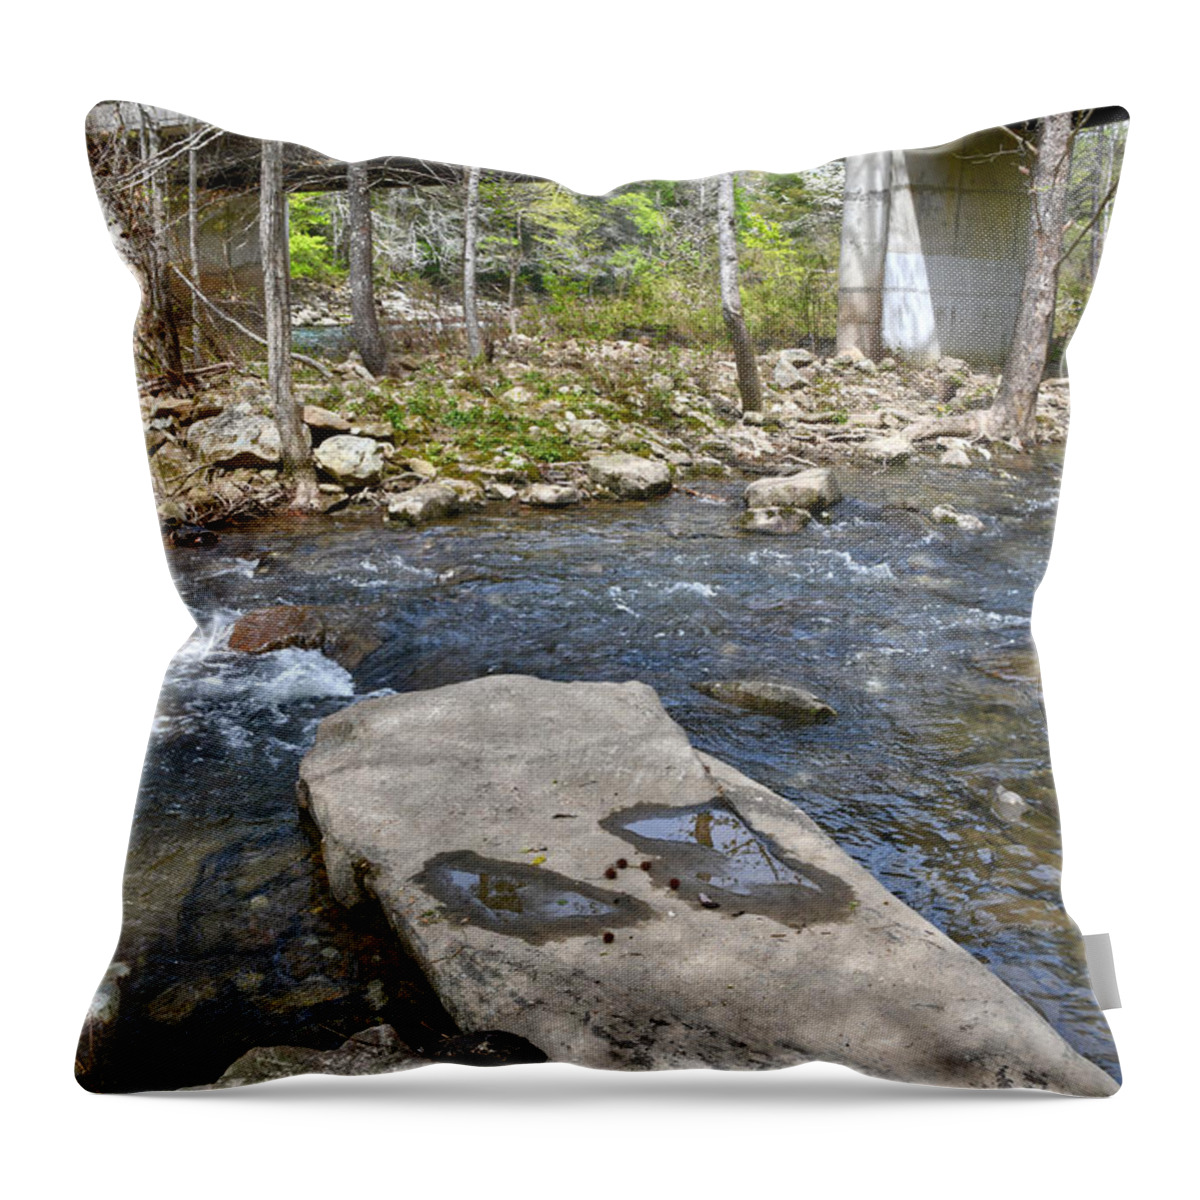 Obed Wild And Scenic River National Park Throw Pillow featuring the photograph Lily Bridge 2 by Phil Perkins